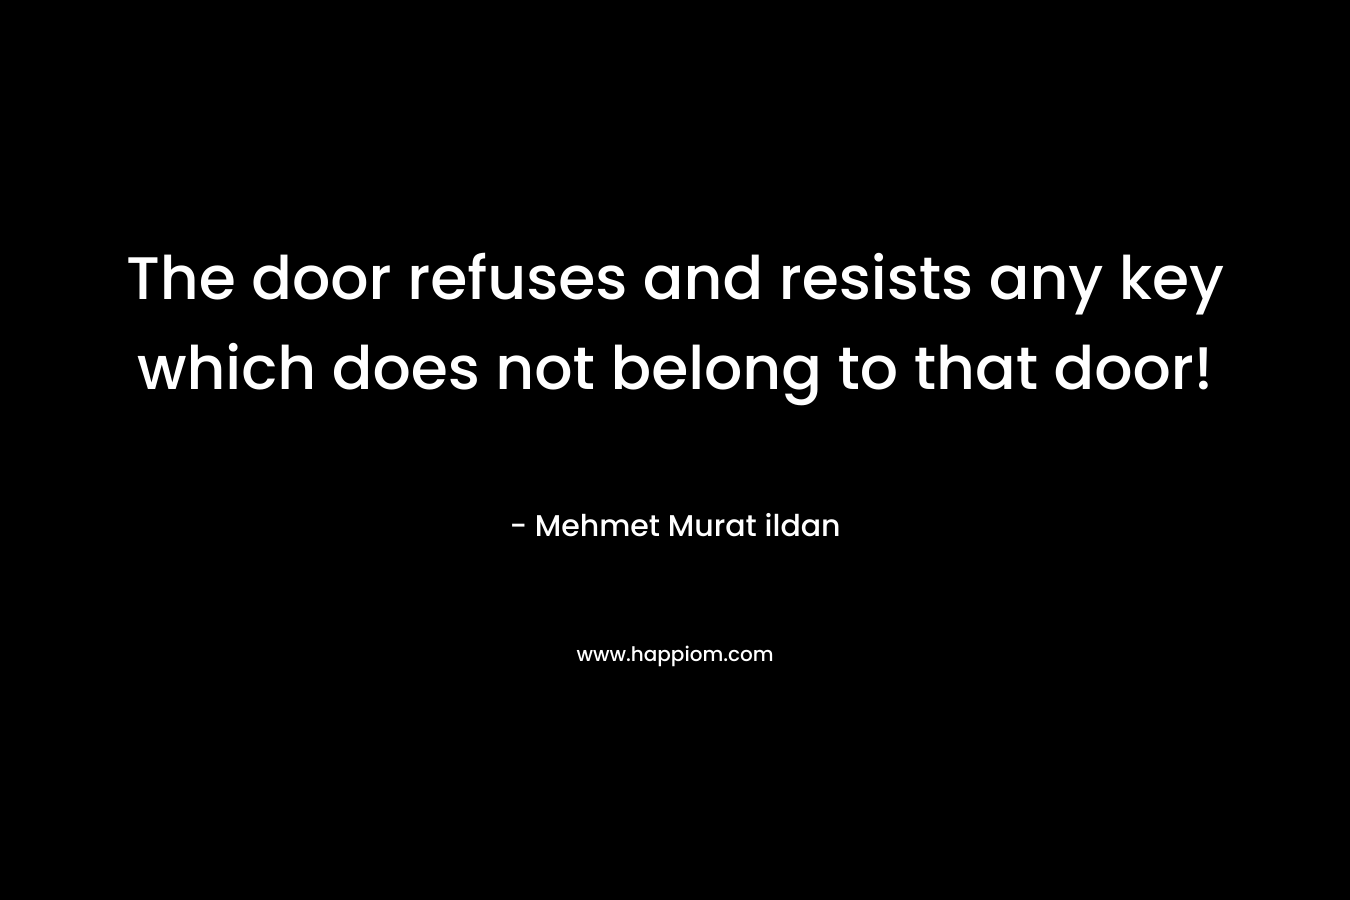 The door refuses and resists any key which does not belong to that door!